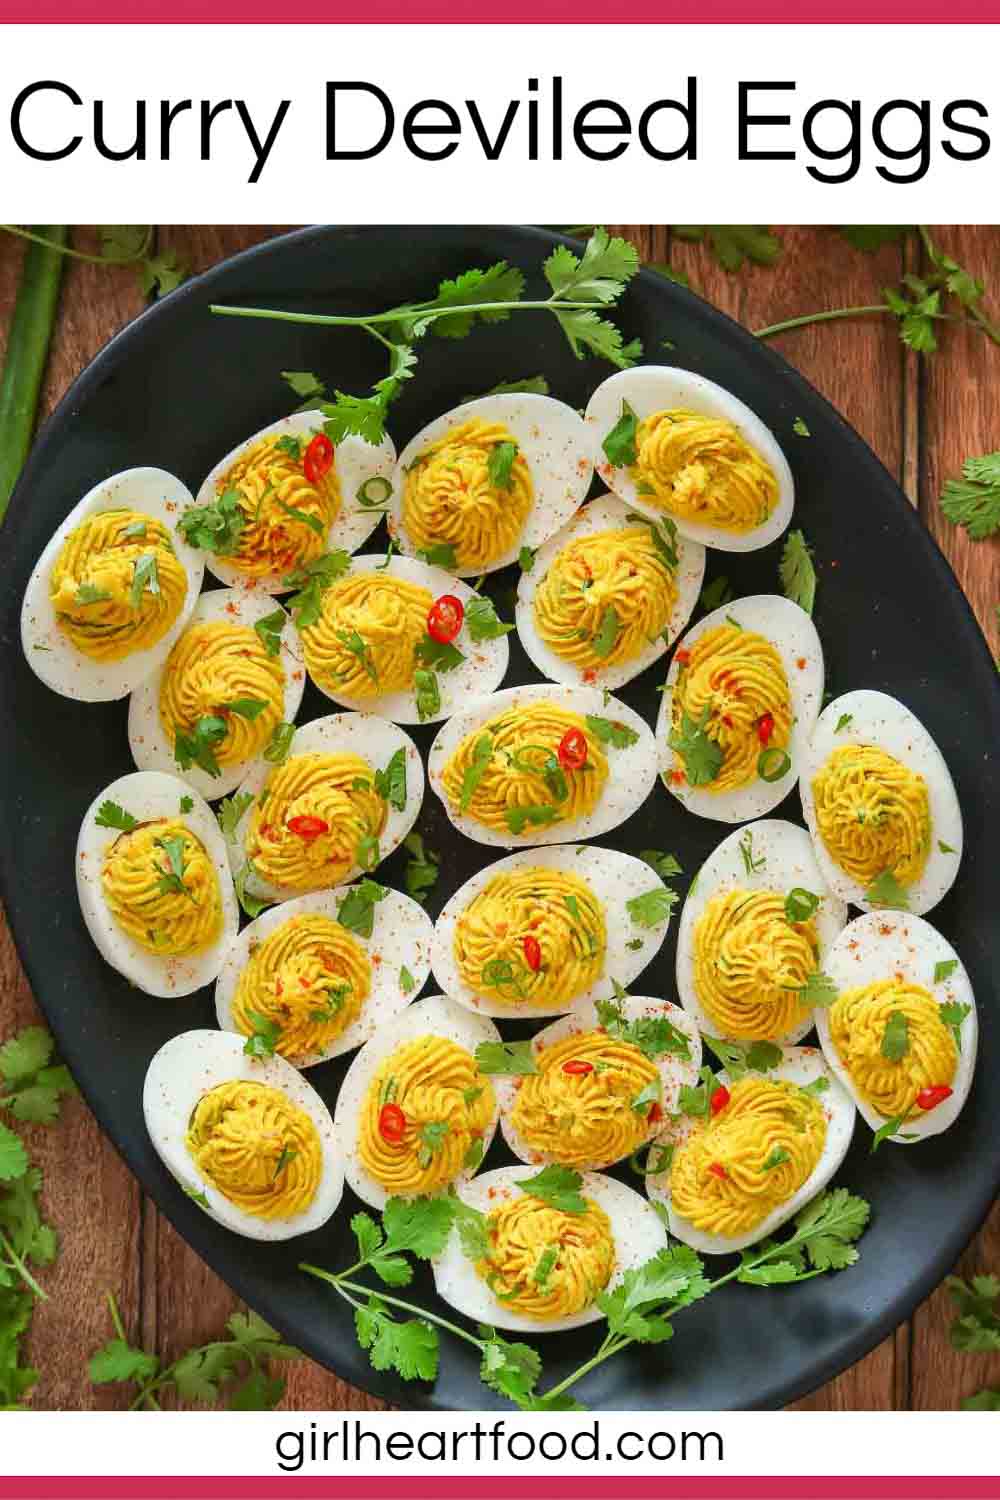 Curry Deviled Eggs Recipe | Girl Heart Food®